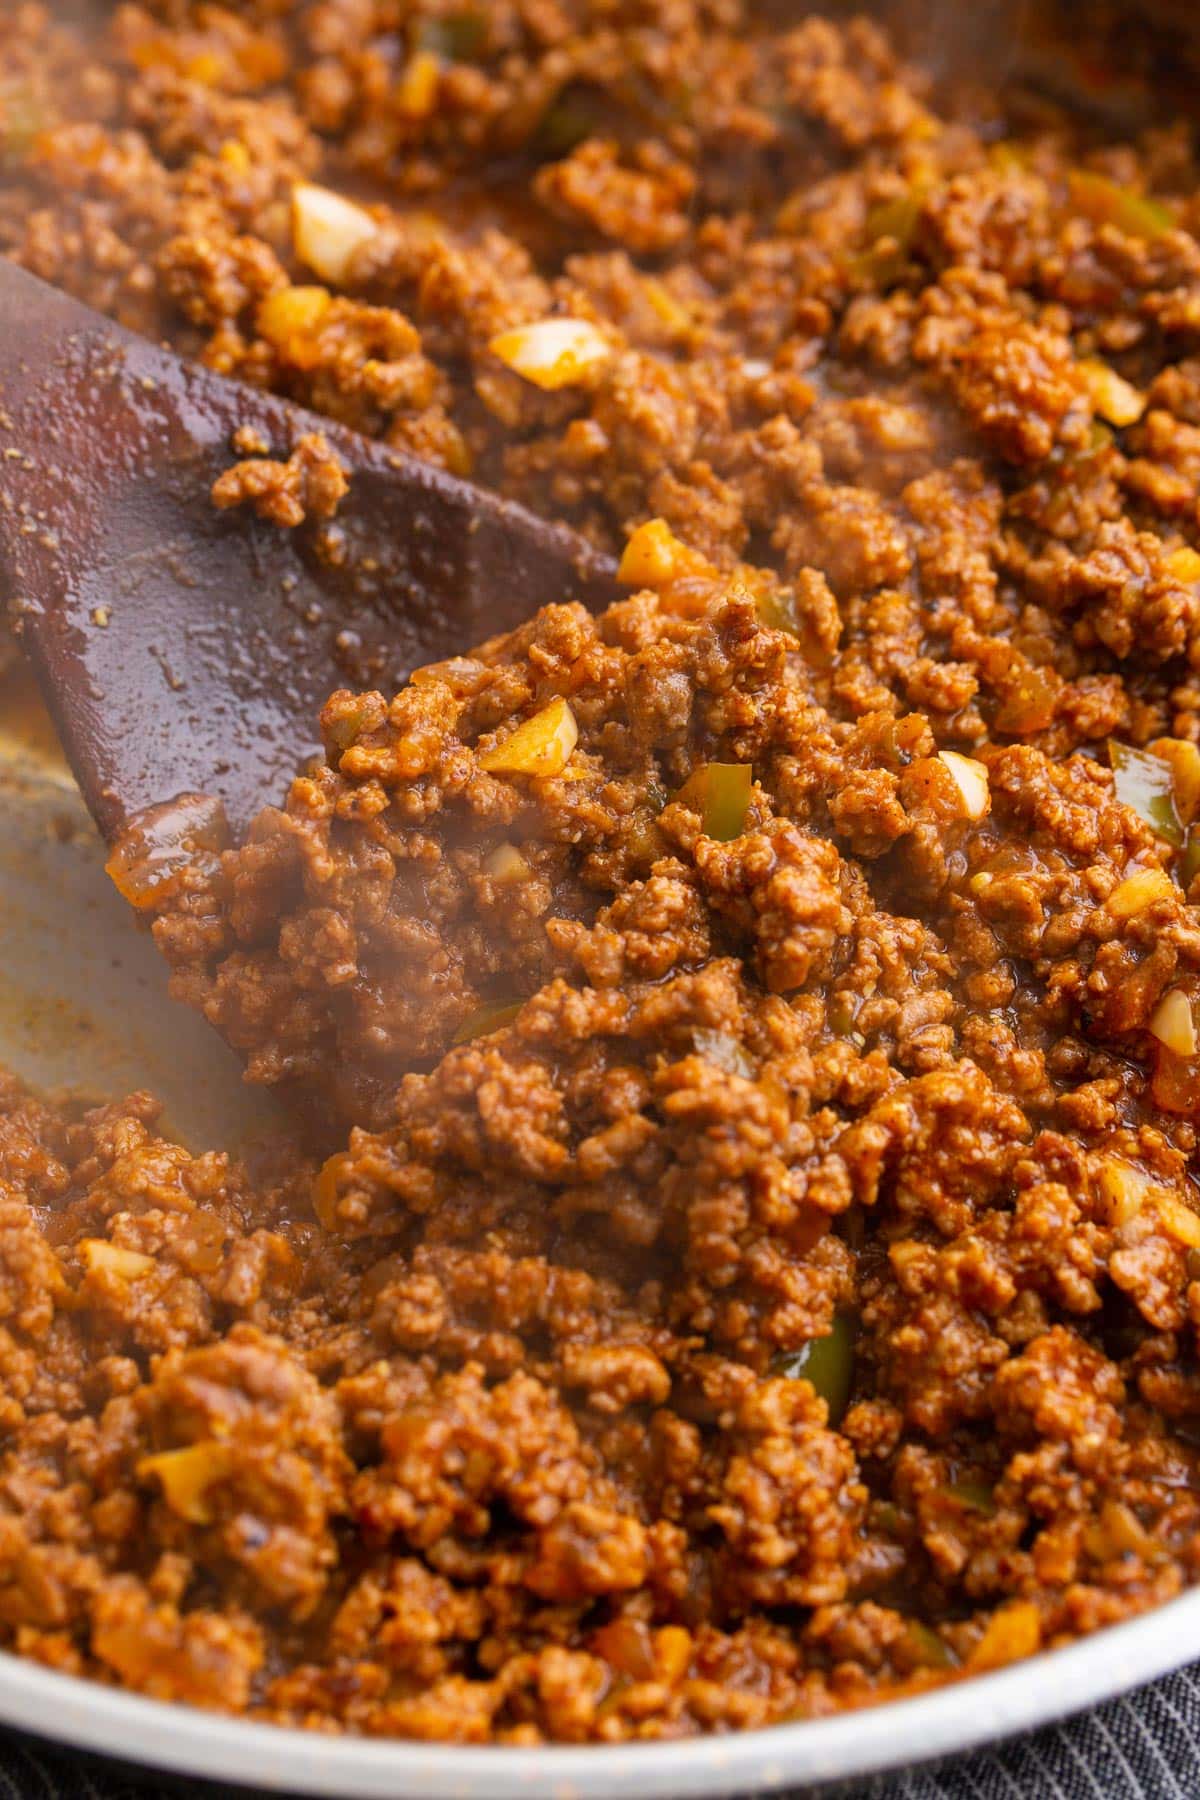 A close up photo of homemade Sloppy Joe sauce simmering in a stainless steel skillet.